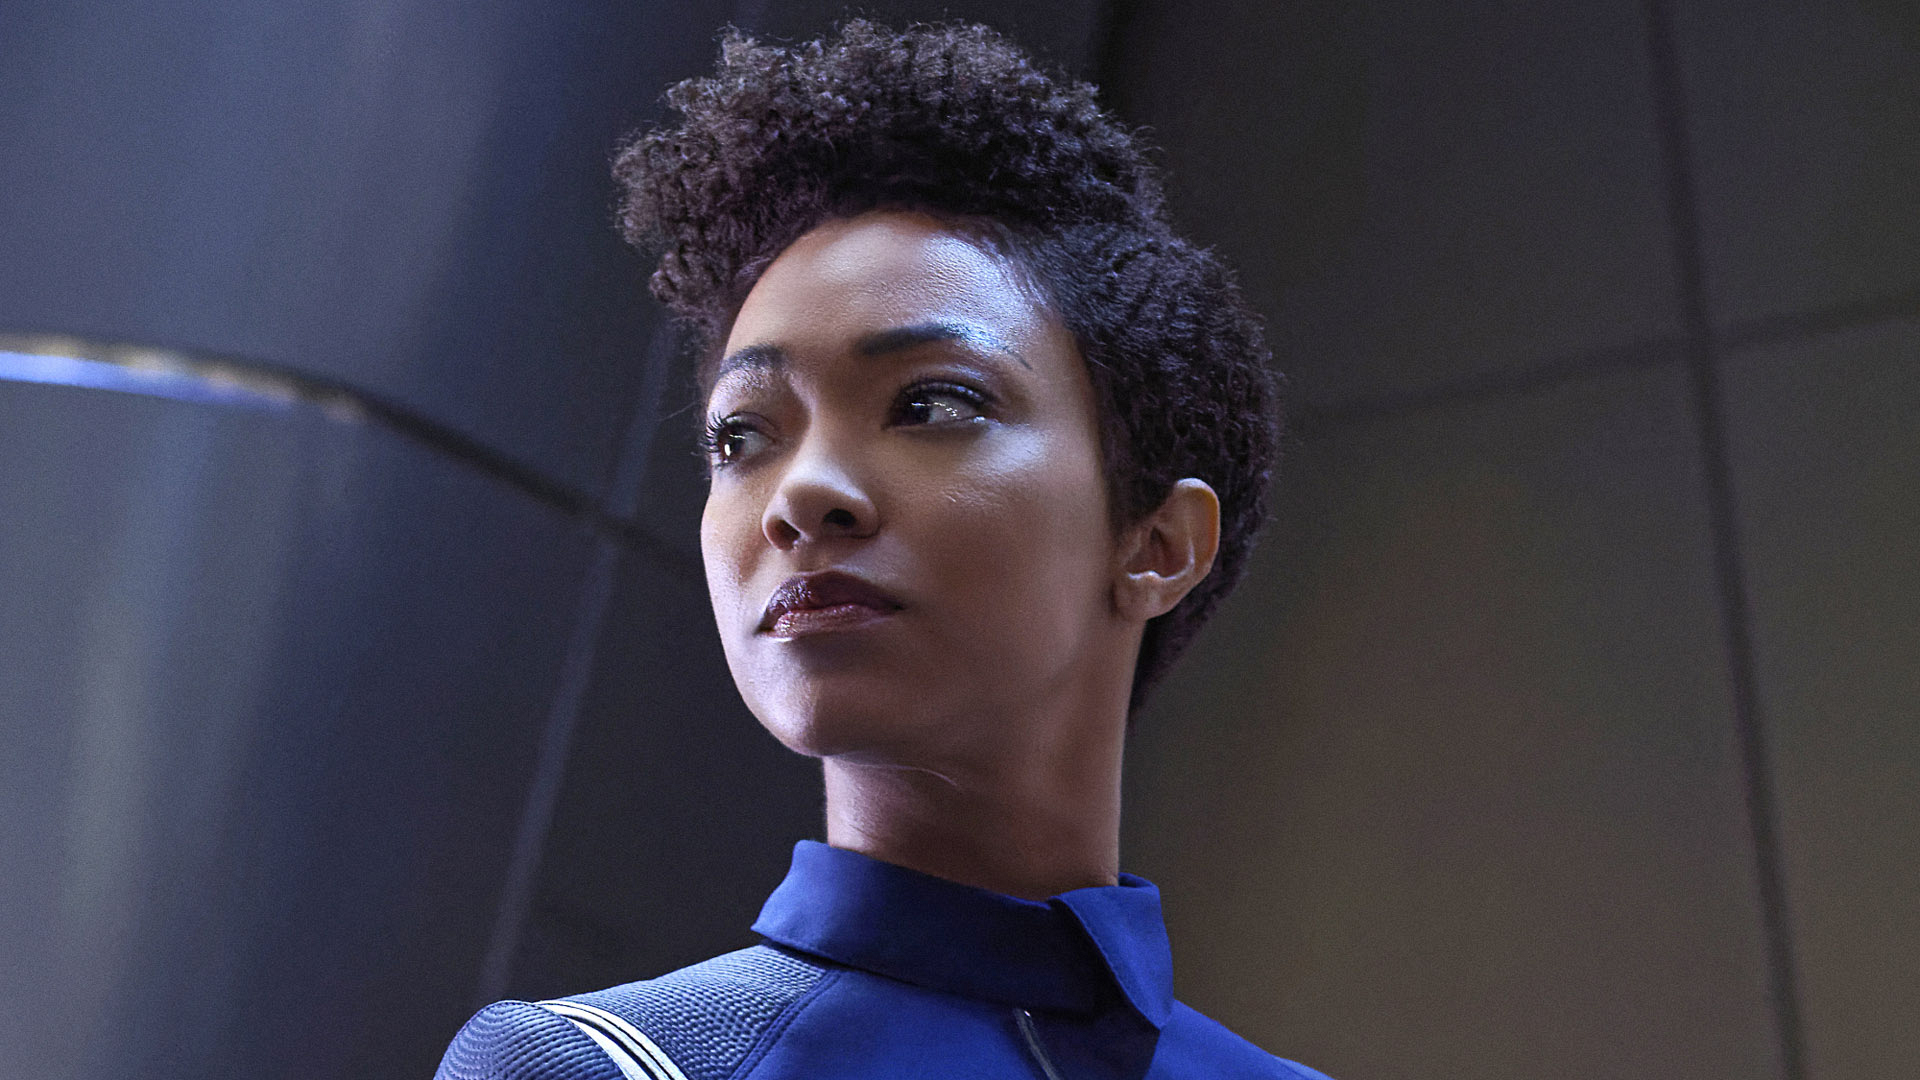 Check Out New Photos From Episode 7 Of Star Trek: Discovery - Page 7 - Star Trek ...